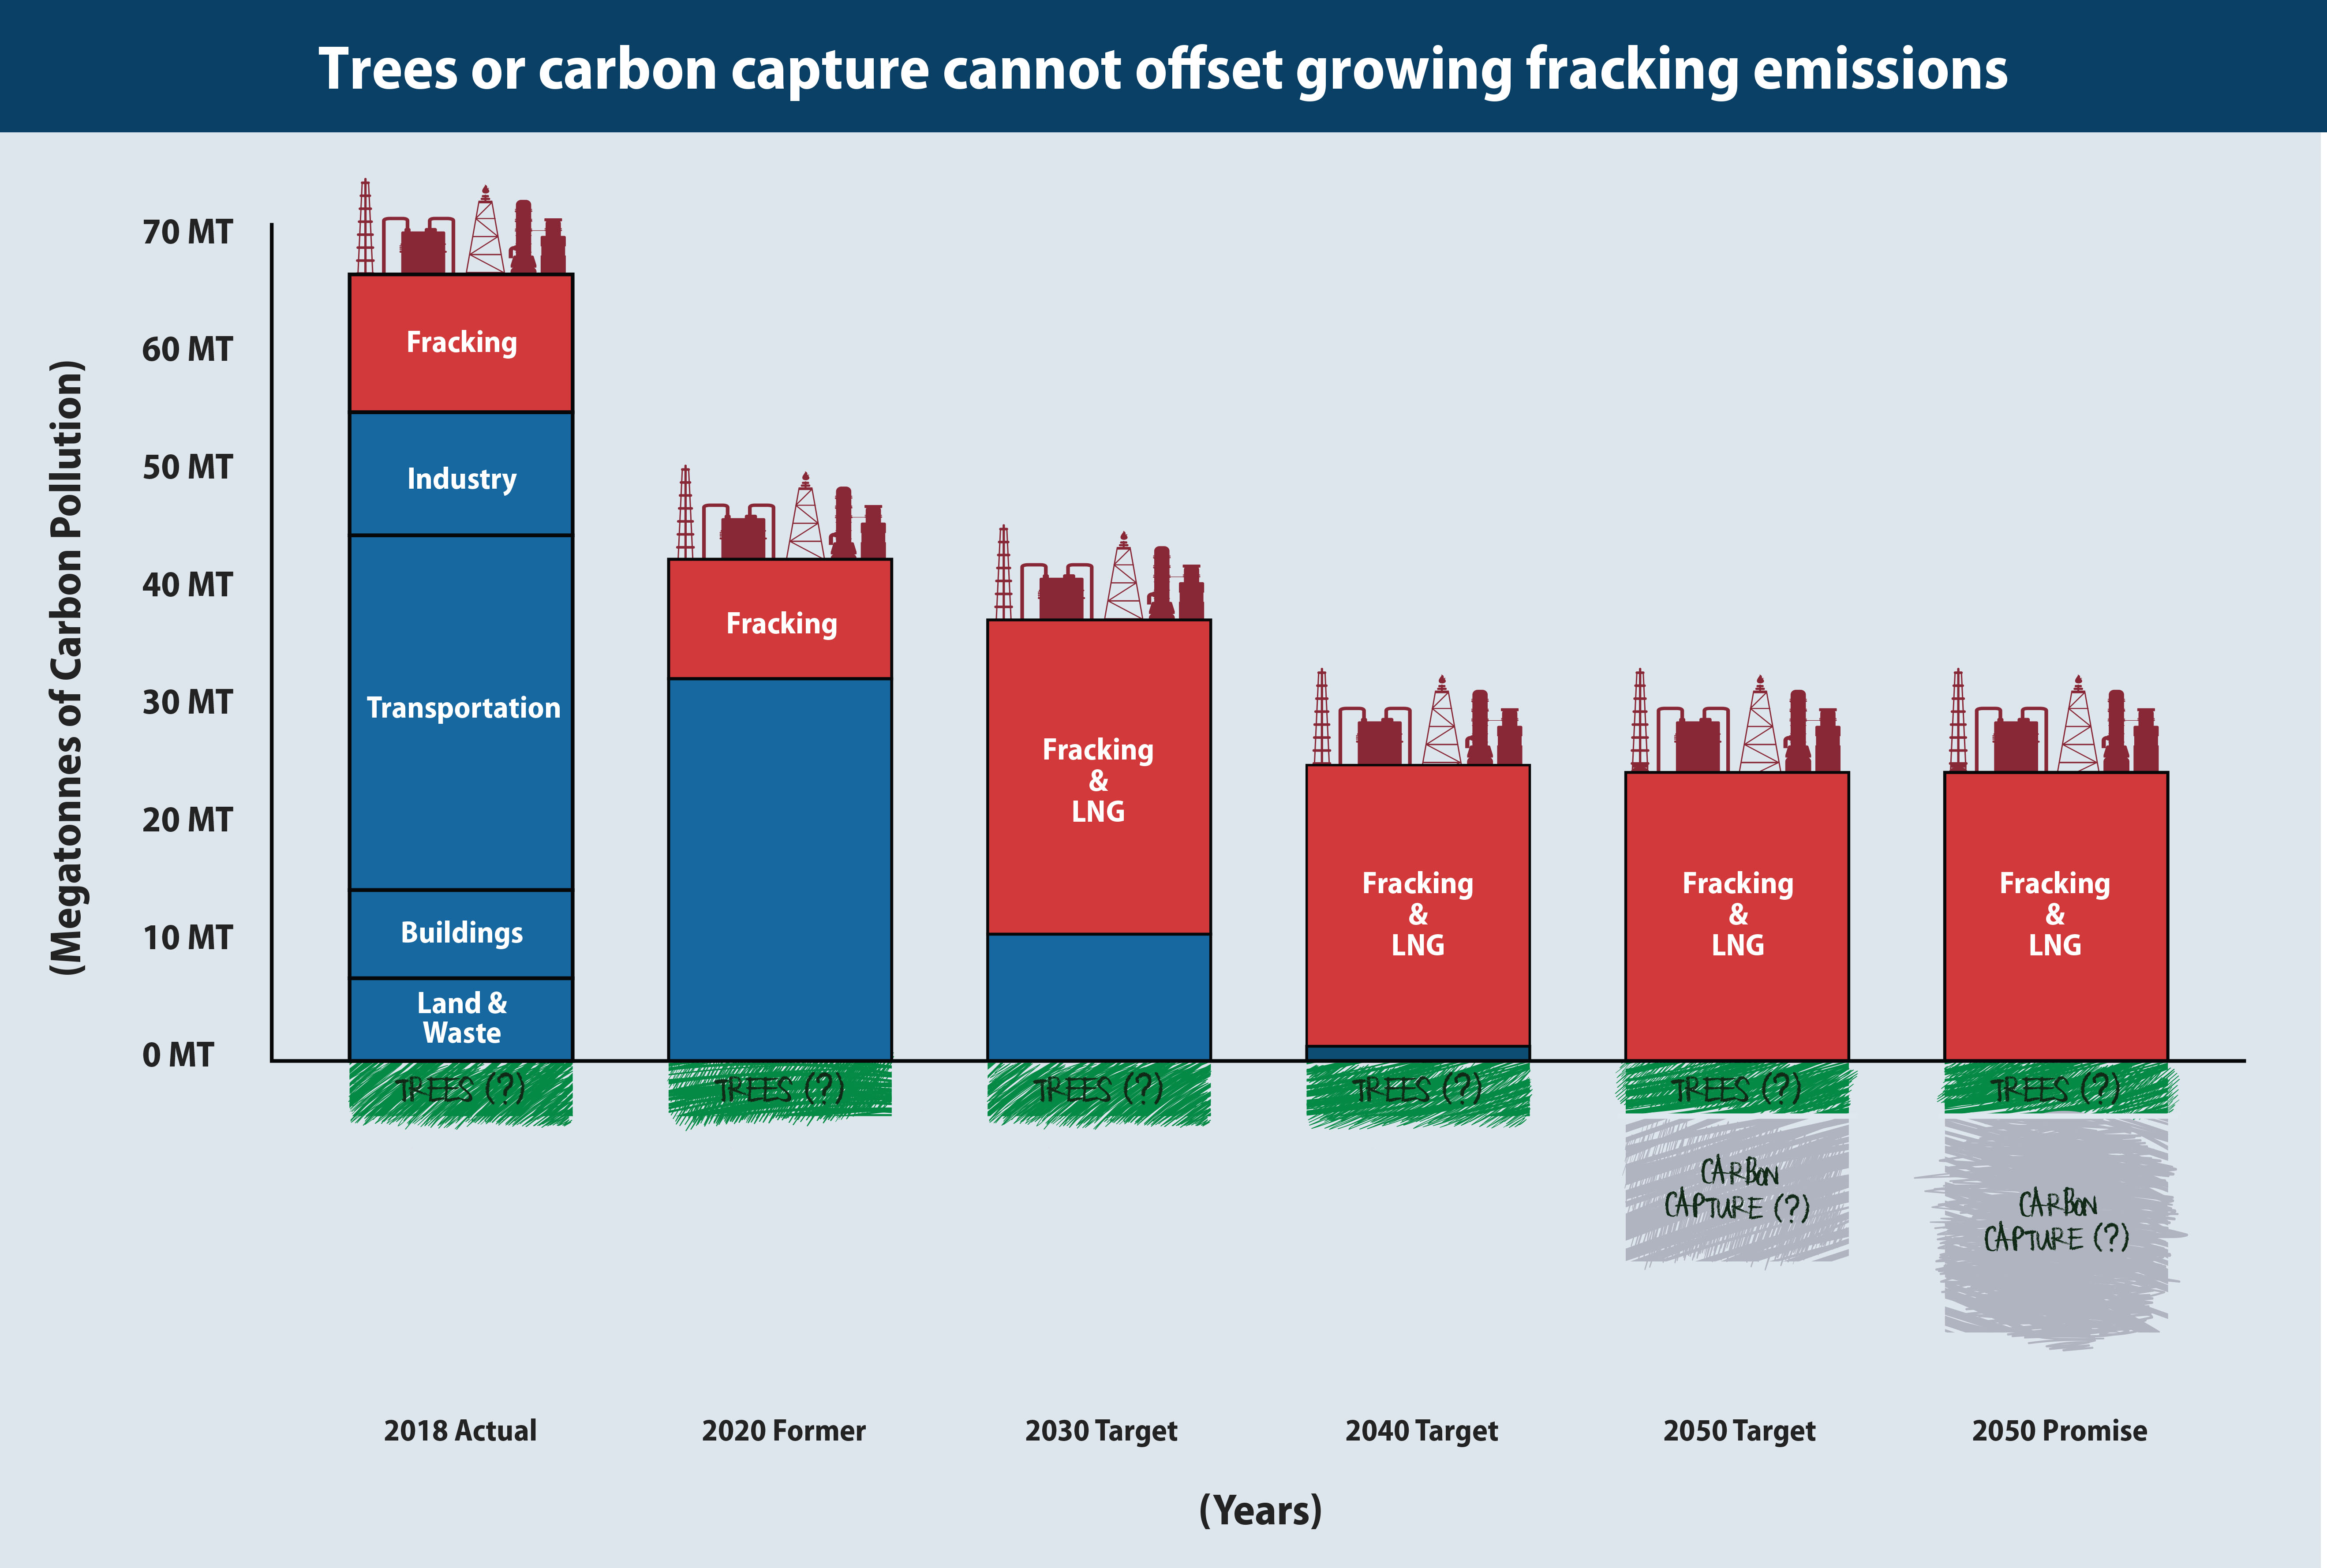 Growing emissions from BC’s fracked gas industry would require impractical timelines to decarbonize everything else and delusional reliance on carbon offsets and capture.